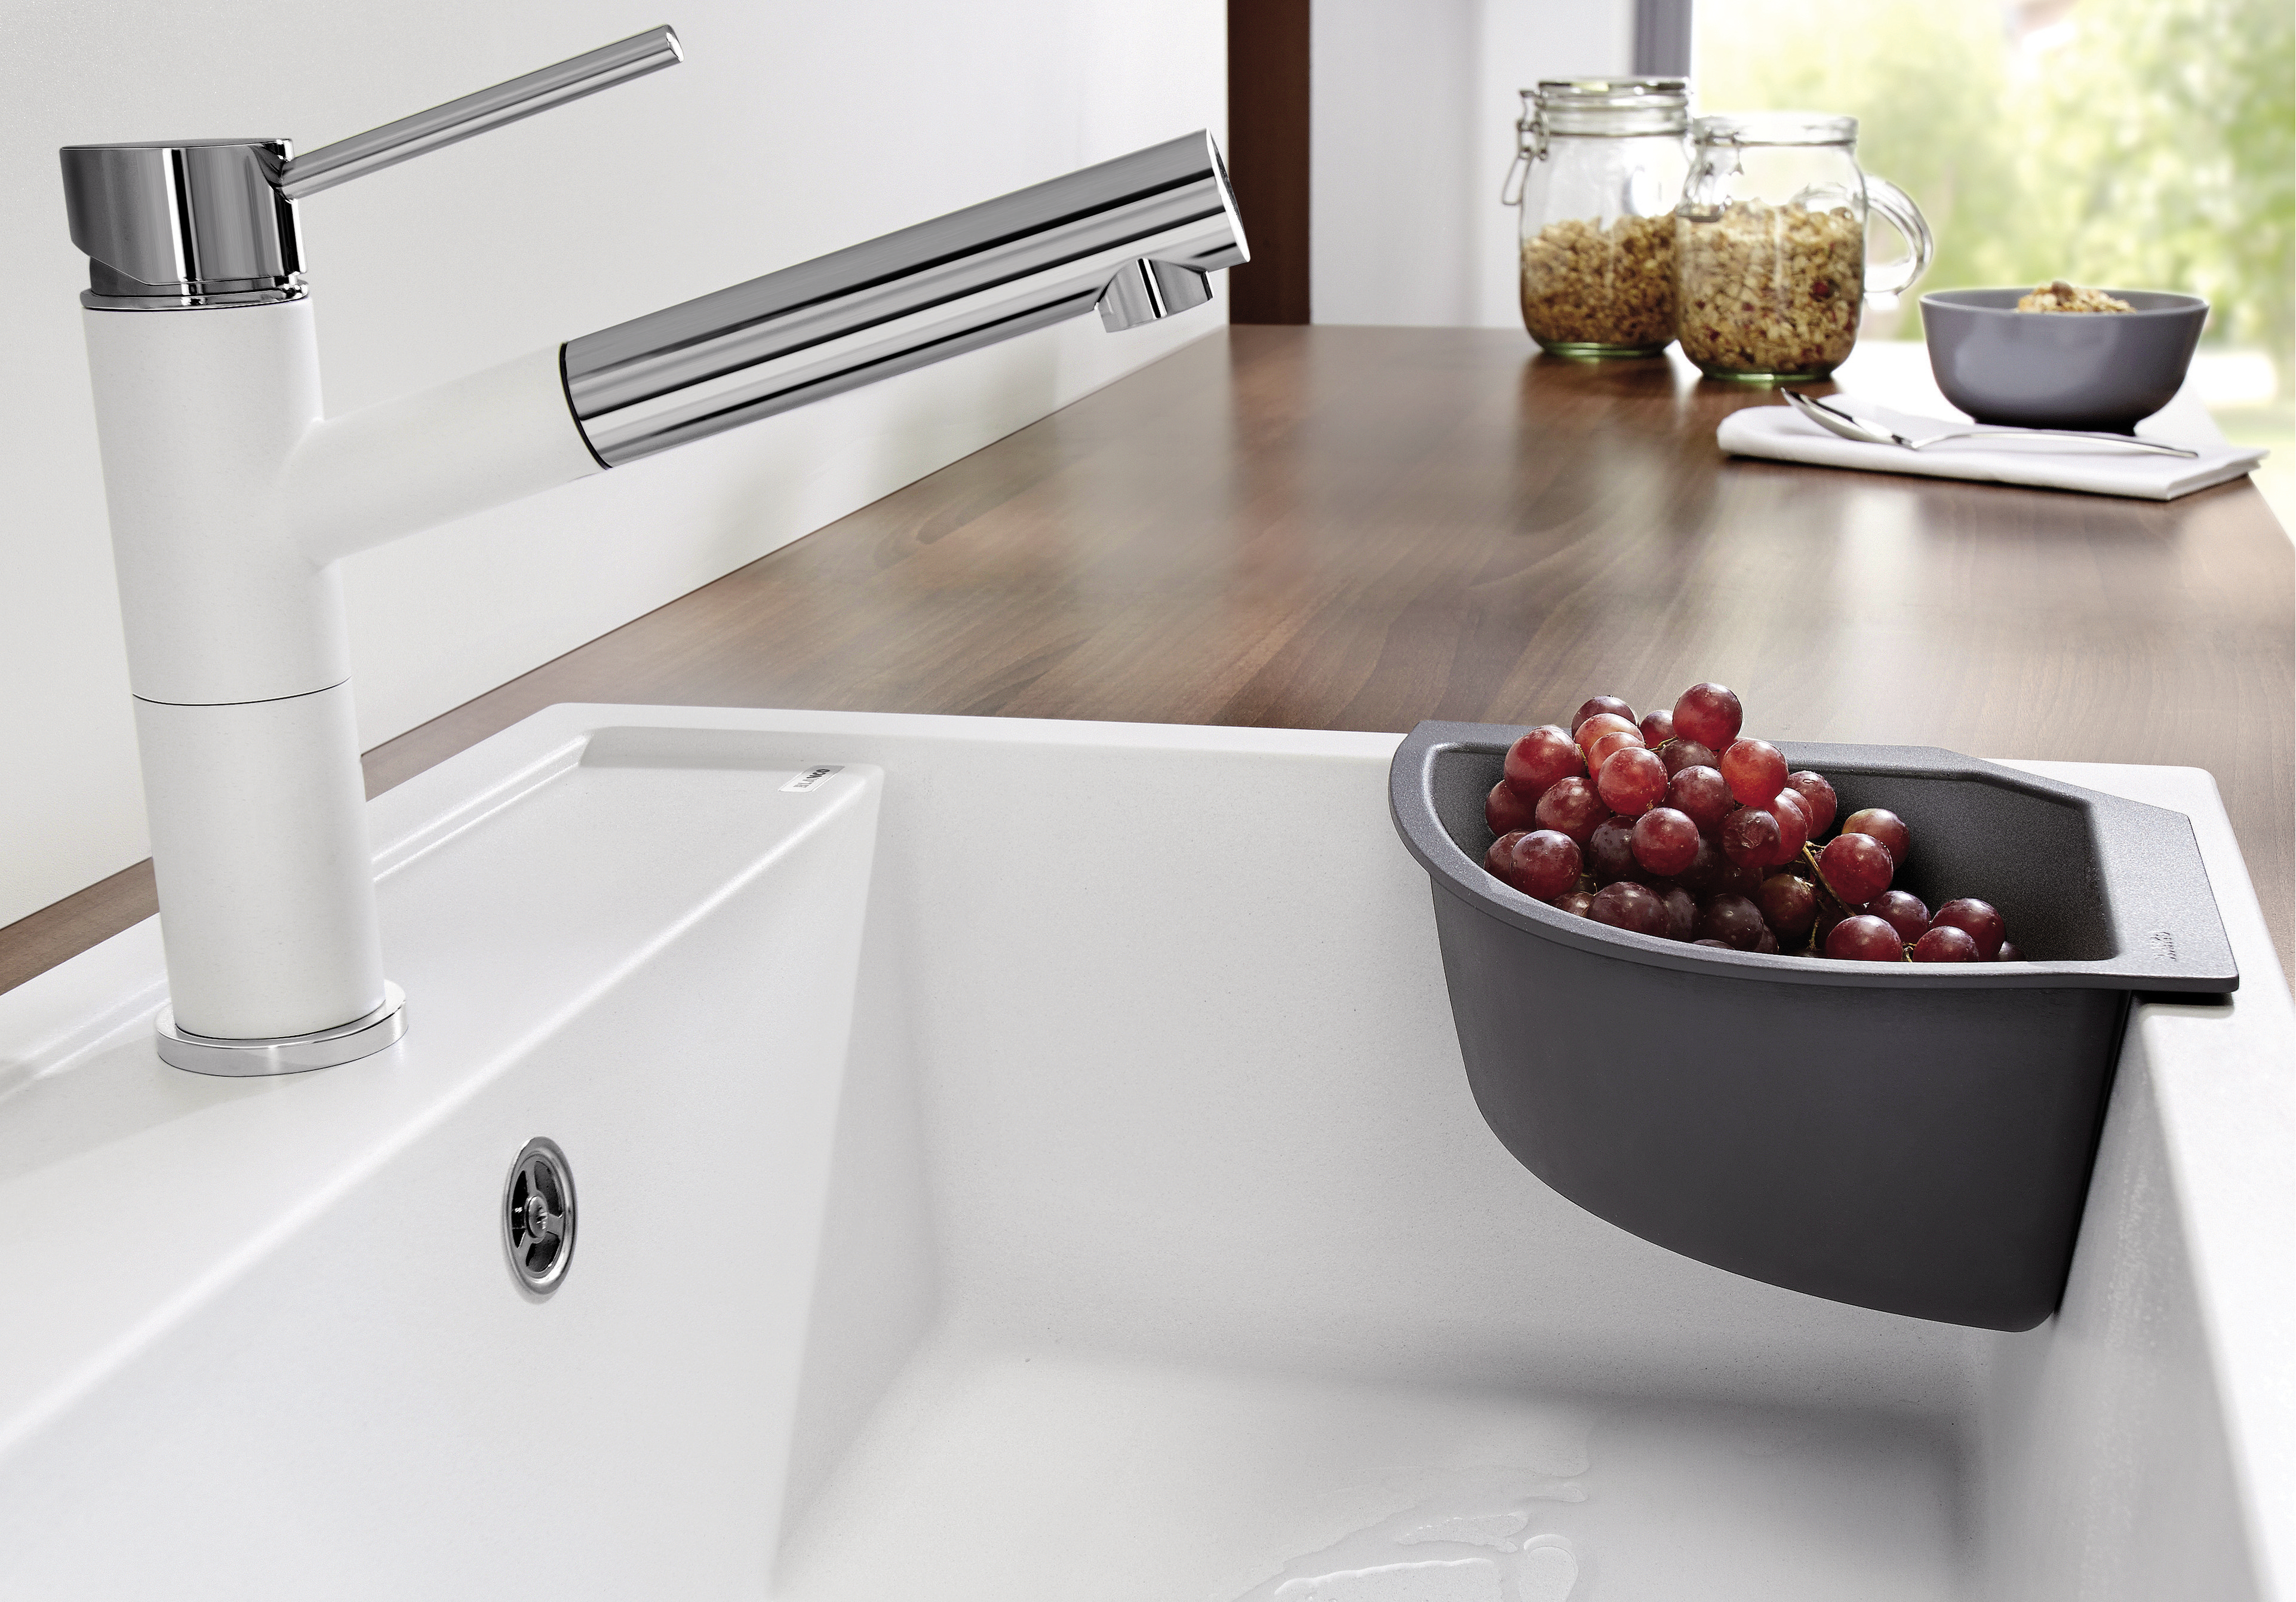 The Corner-Caddy makes a brilliant space-saving sink accessory